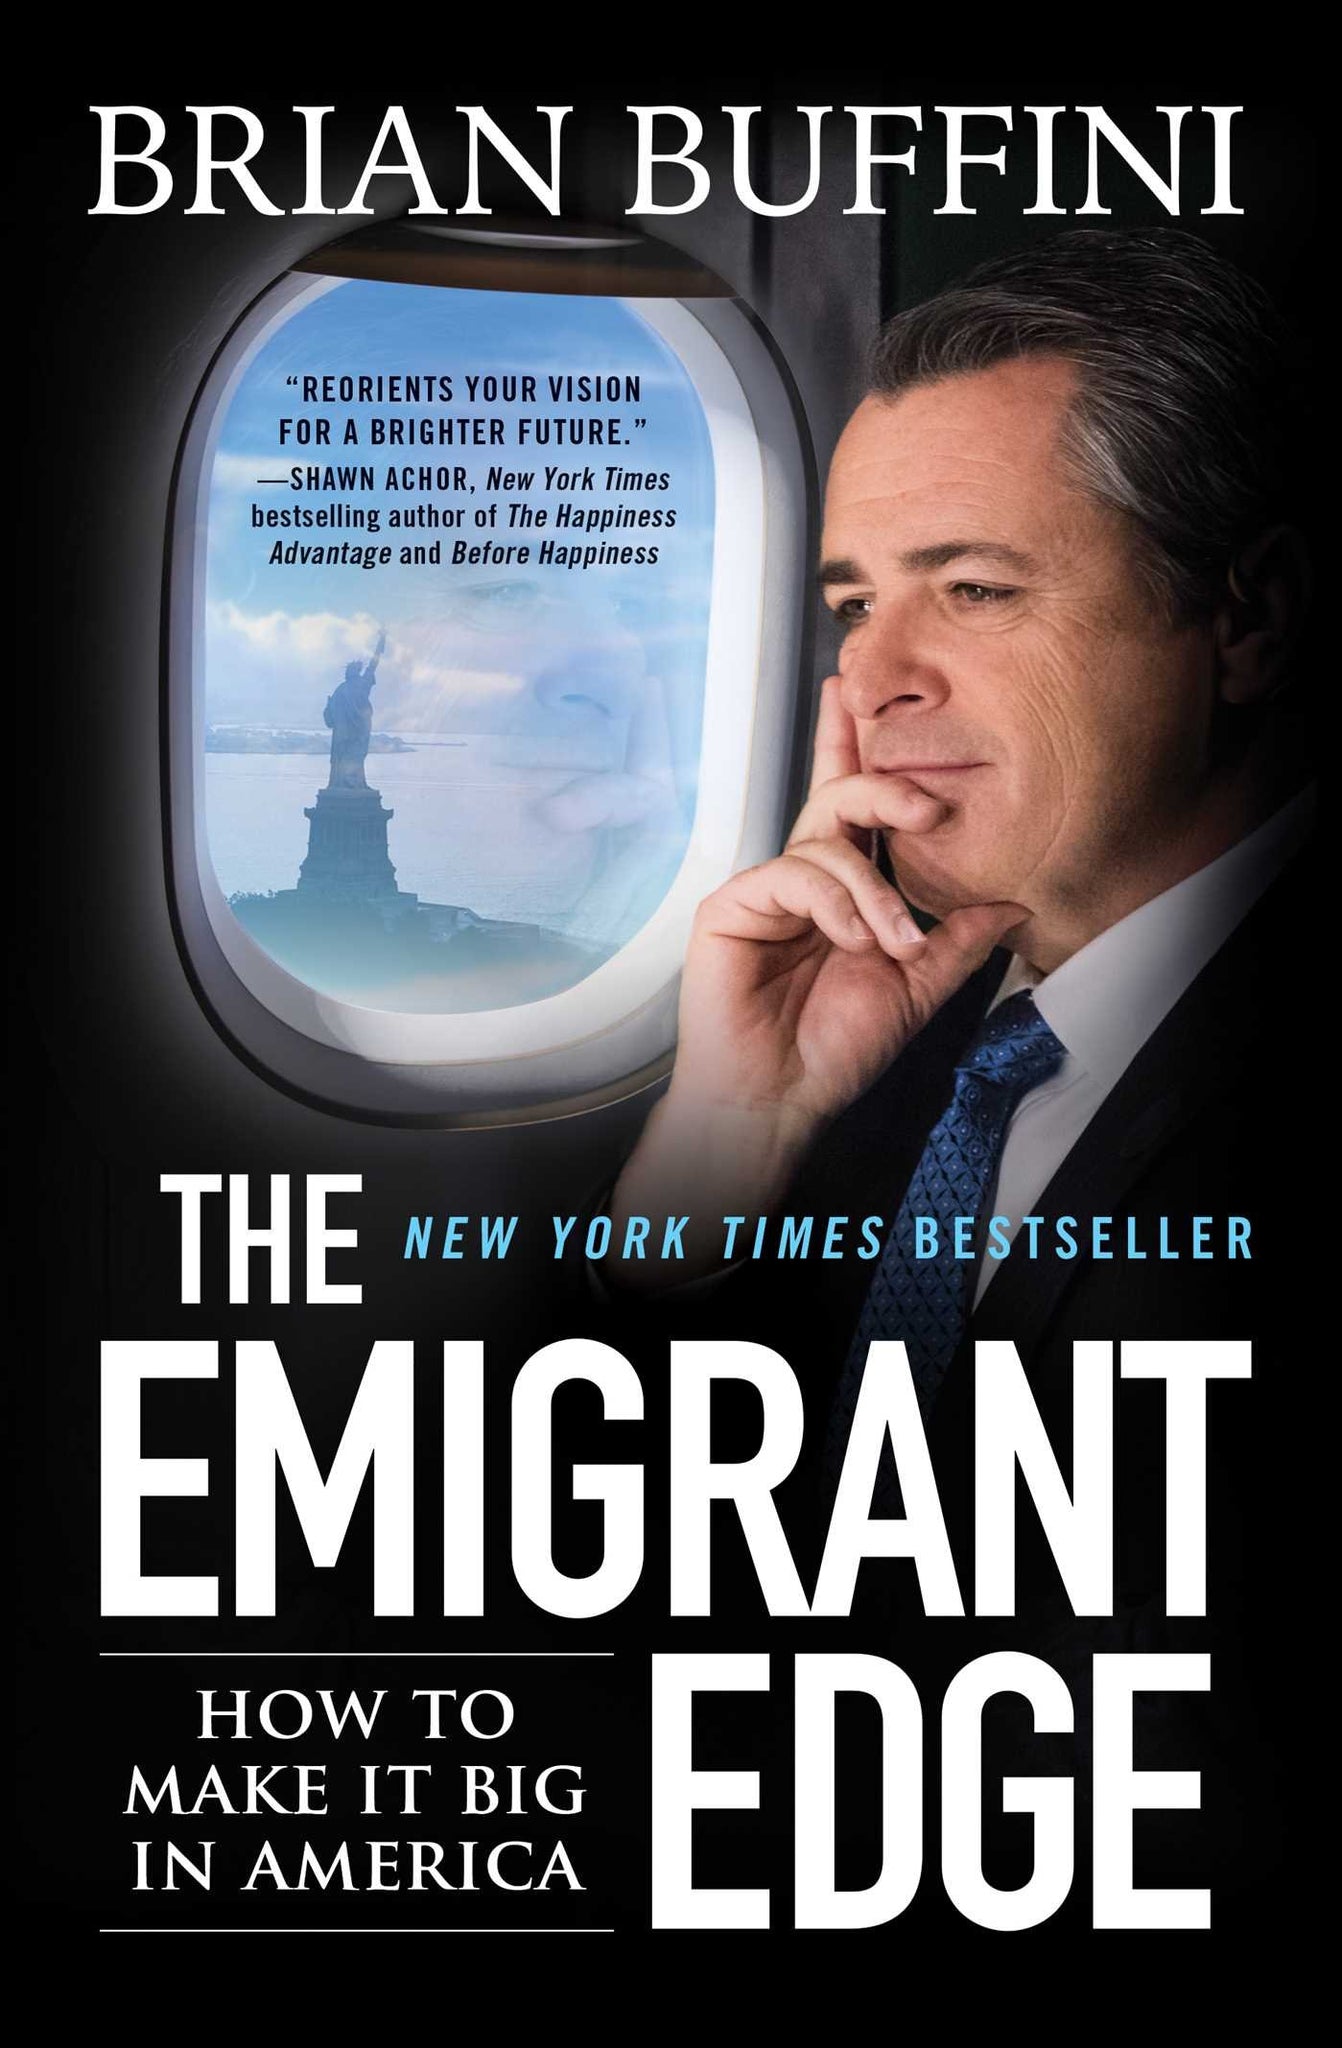 The Emigrant Edge: How to Make It Big in America